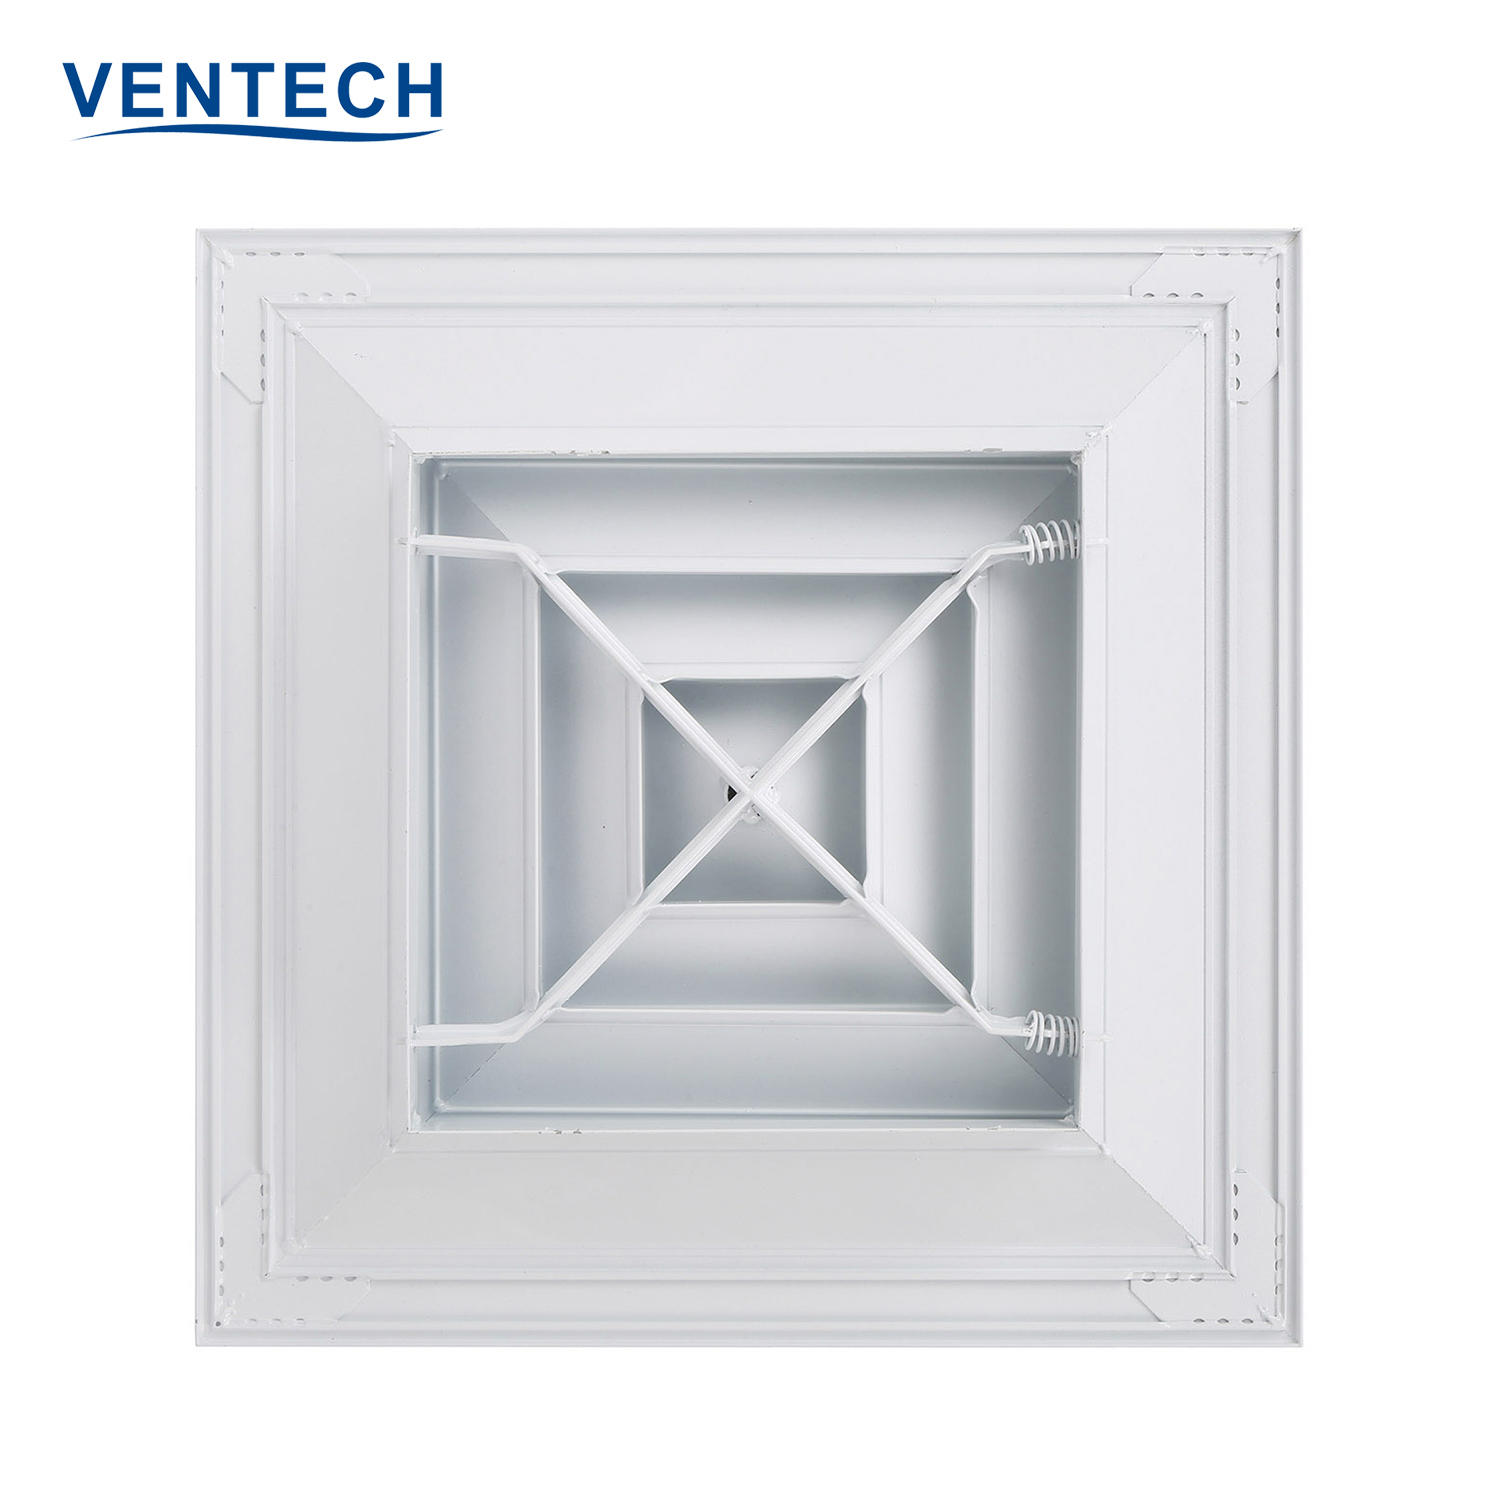 Hvac Diffuser Ventilation havc 4 Way Aluminum Square Ceiling Air Supply Diffusers 595x595 Face Size  With Obd Damper